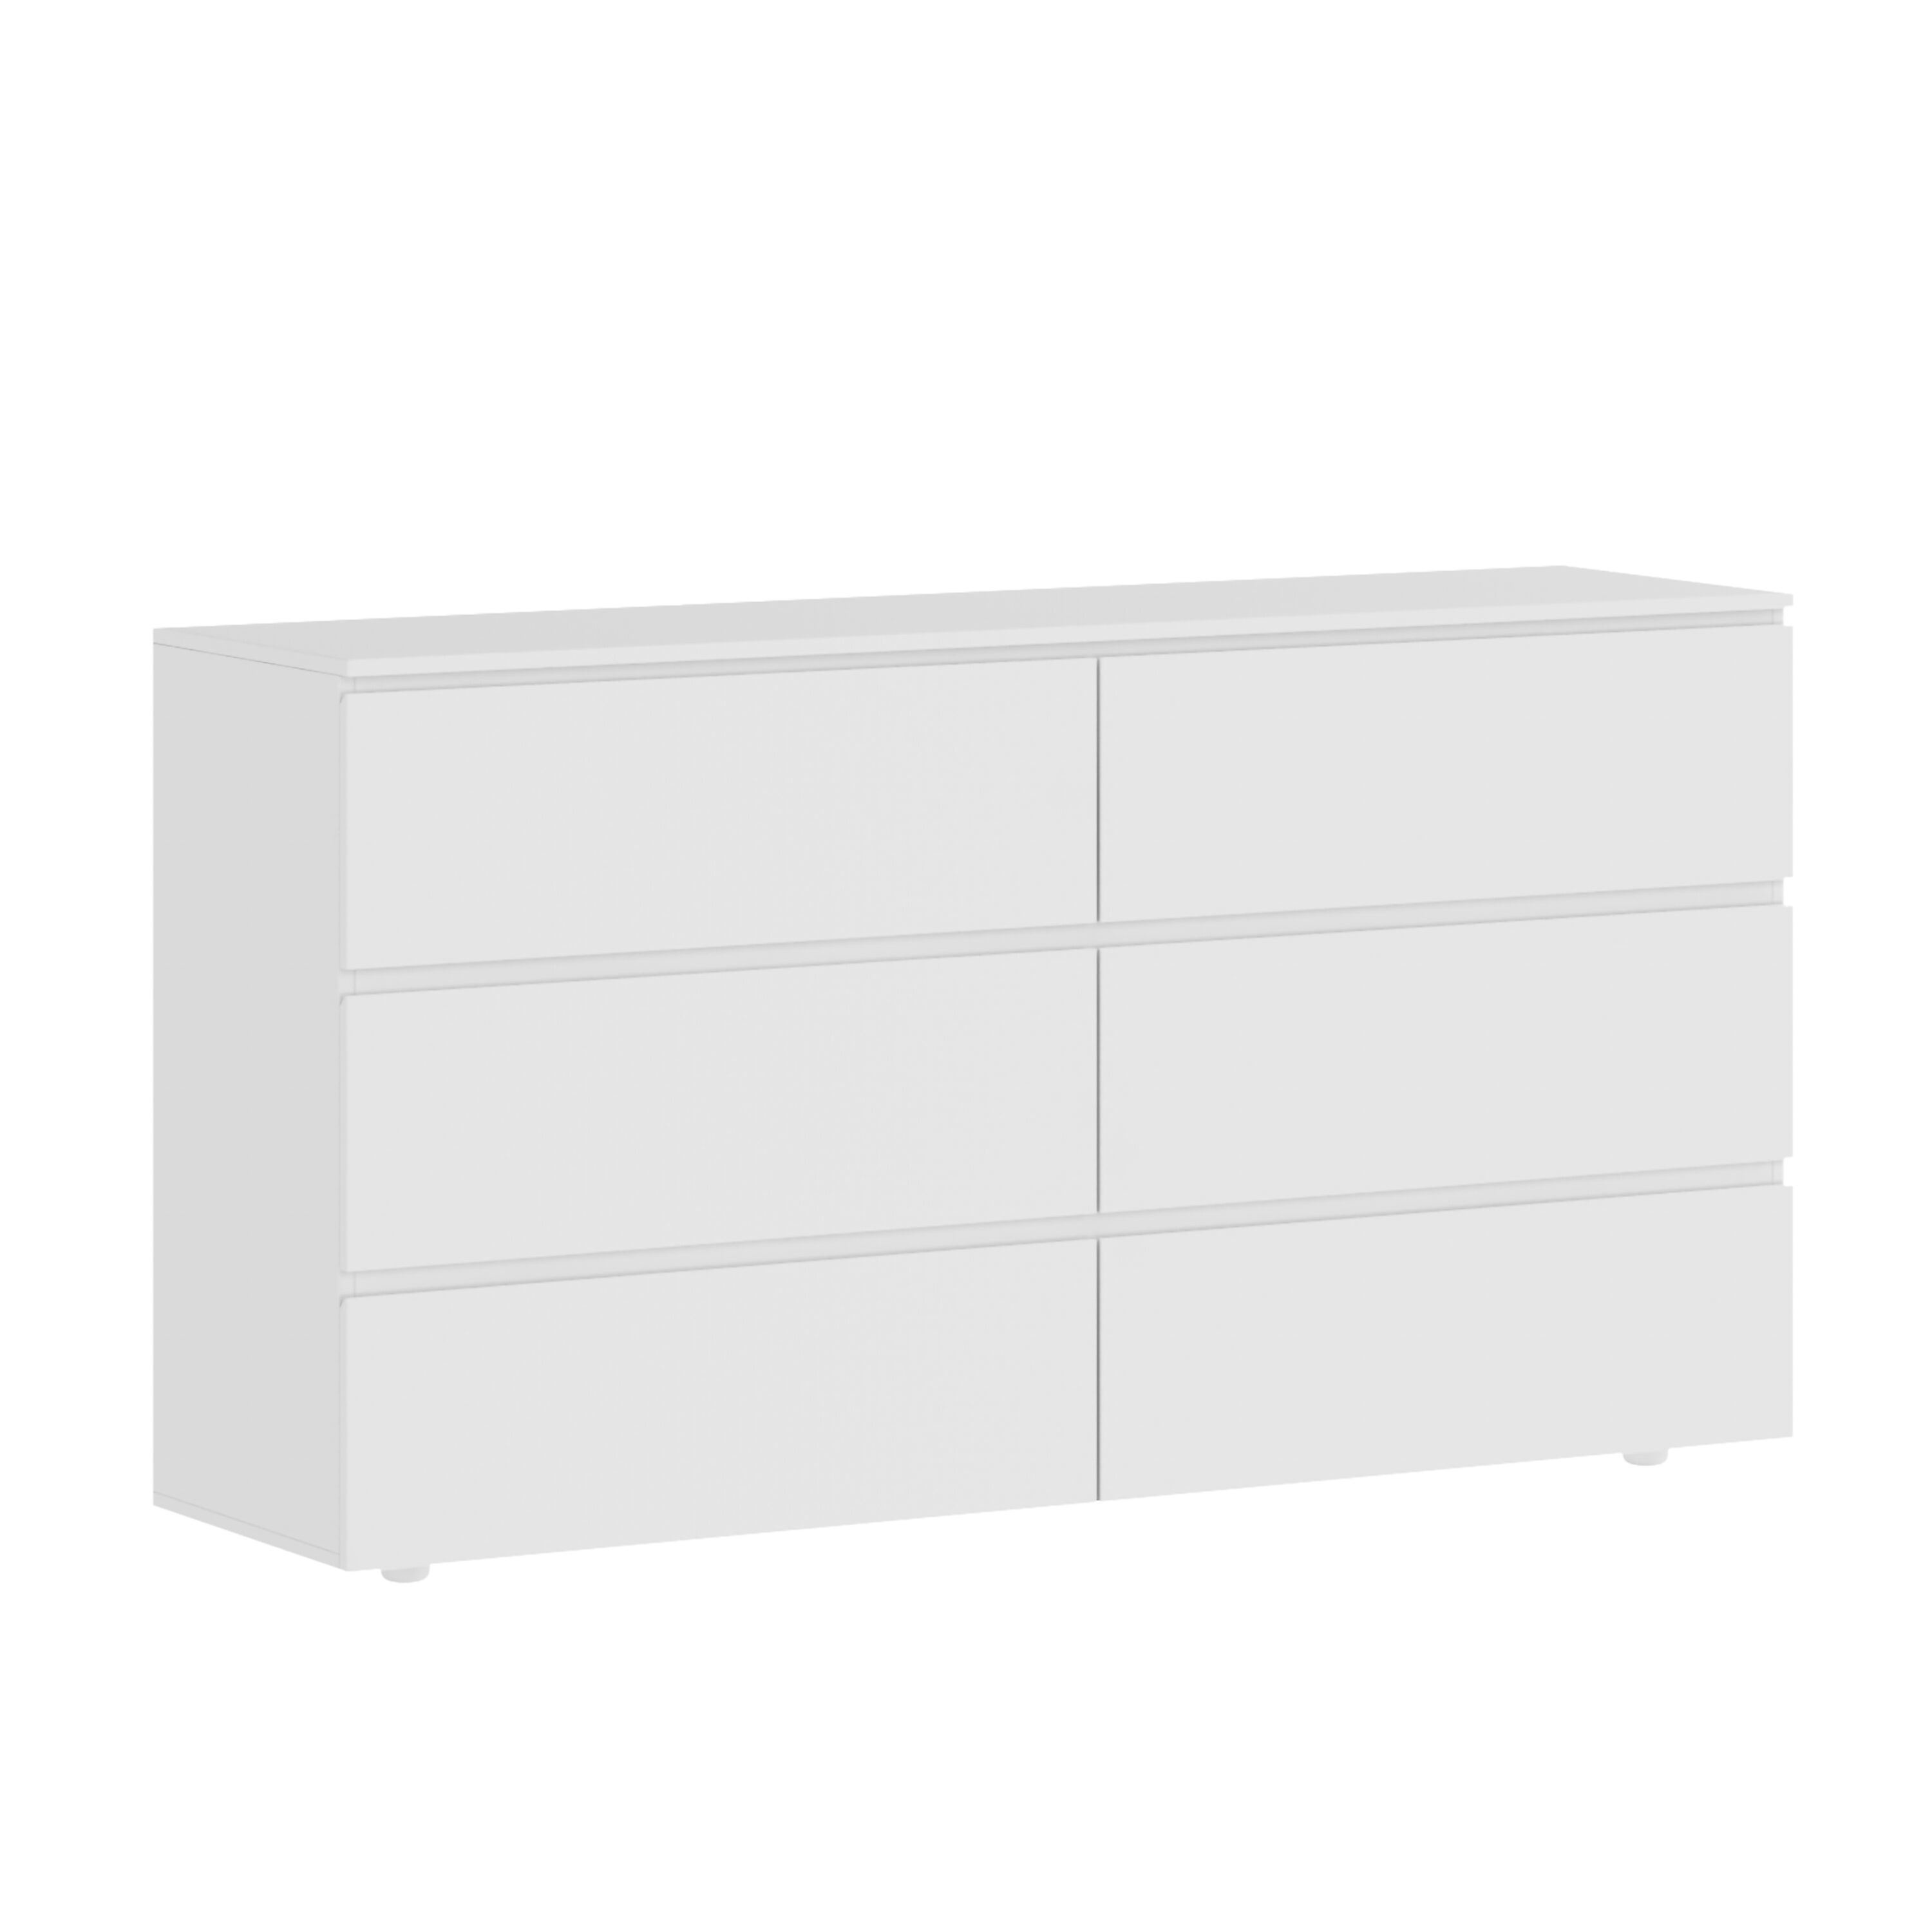 FUFU&GAGA White 6-Drawer Dresser in the department at Lowes.com